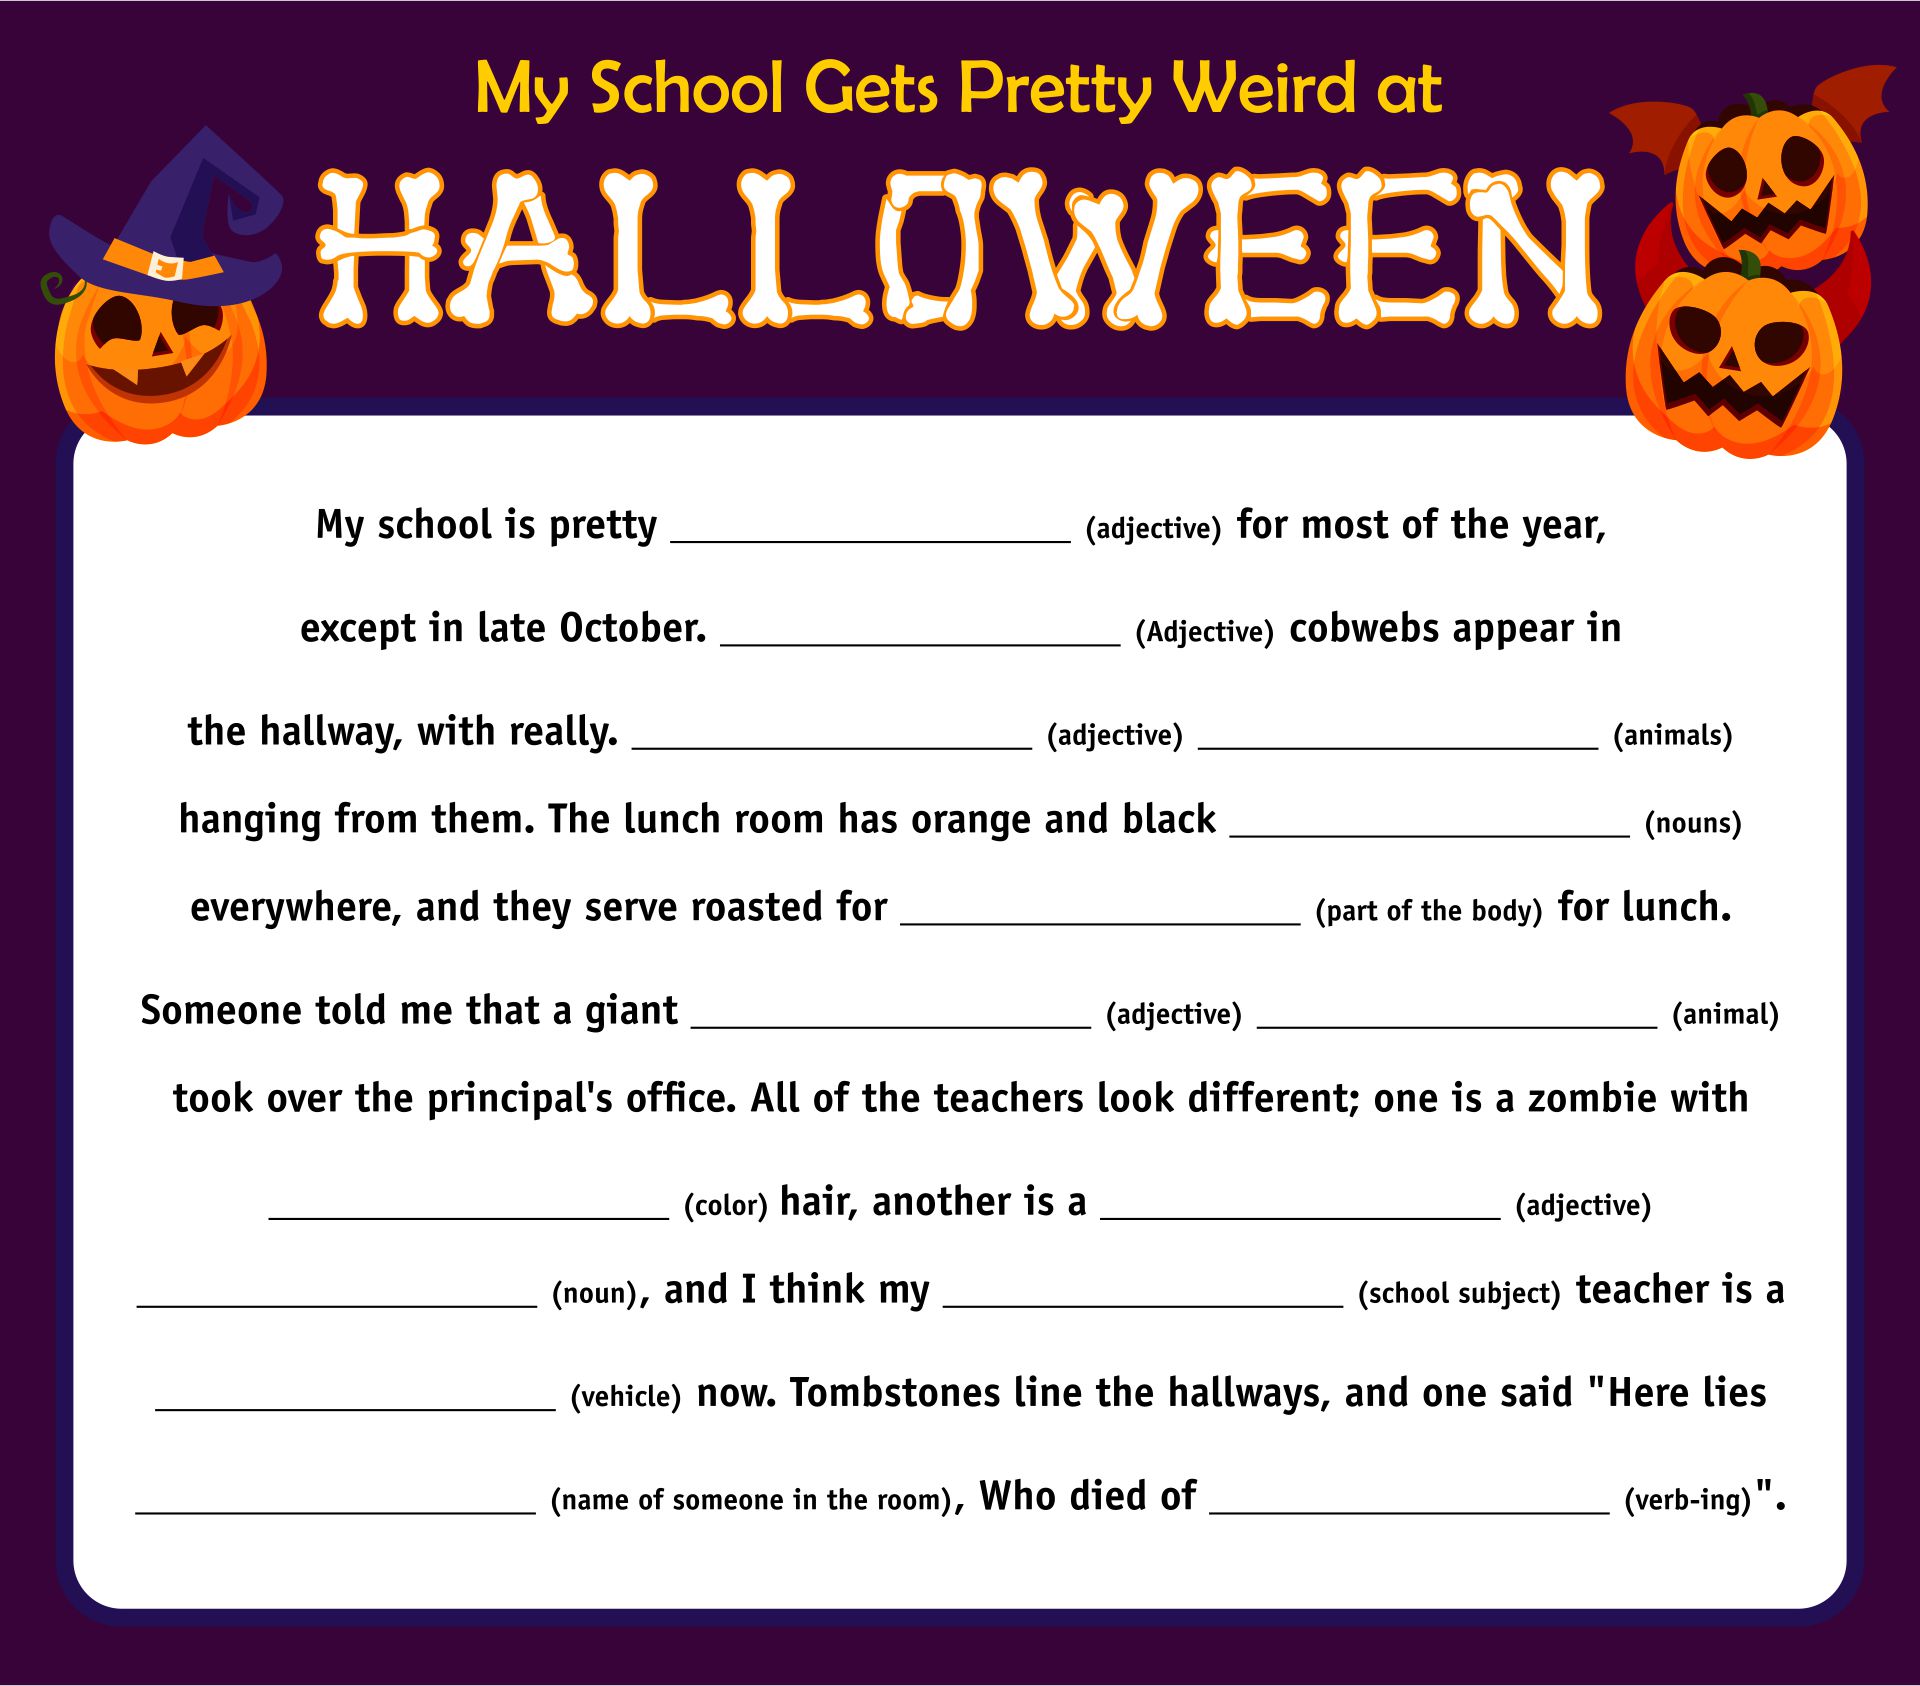 Printable Halloween Scary Story Fill-In The Blanks